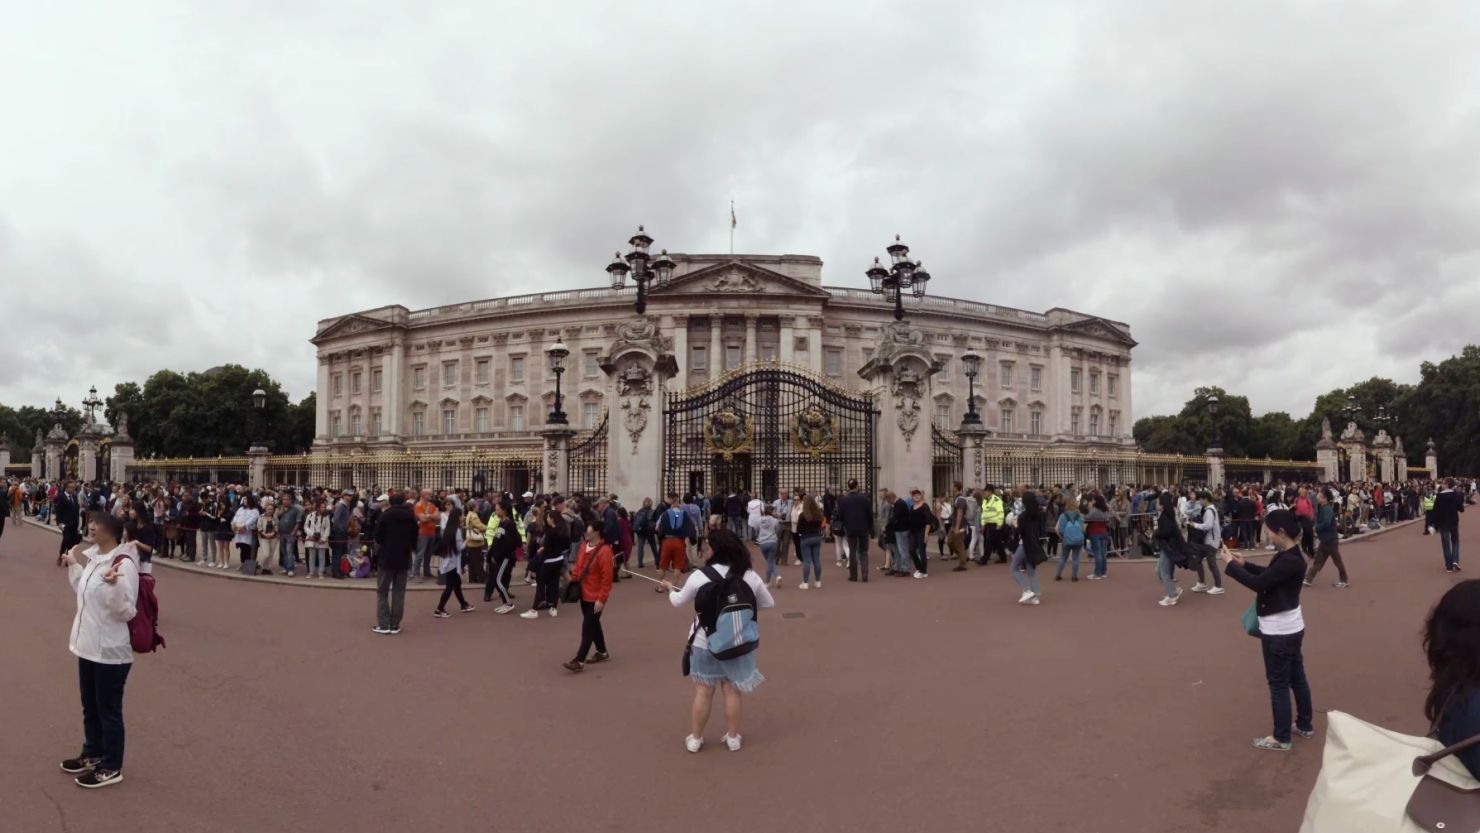 Buckingham Palace is the official residence of Queen Elizabeth II.